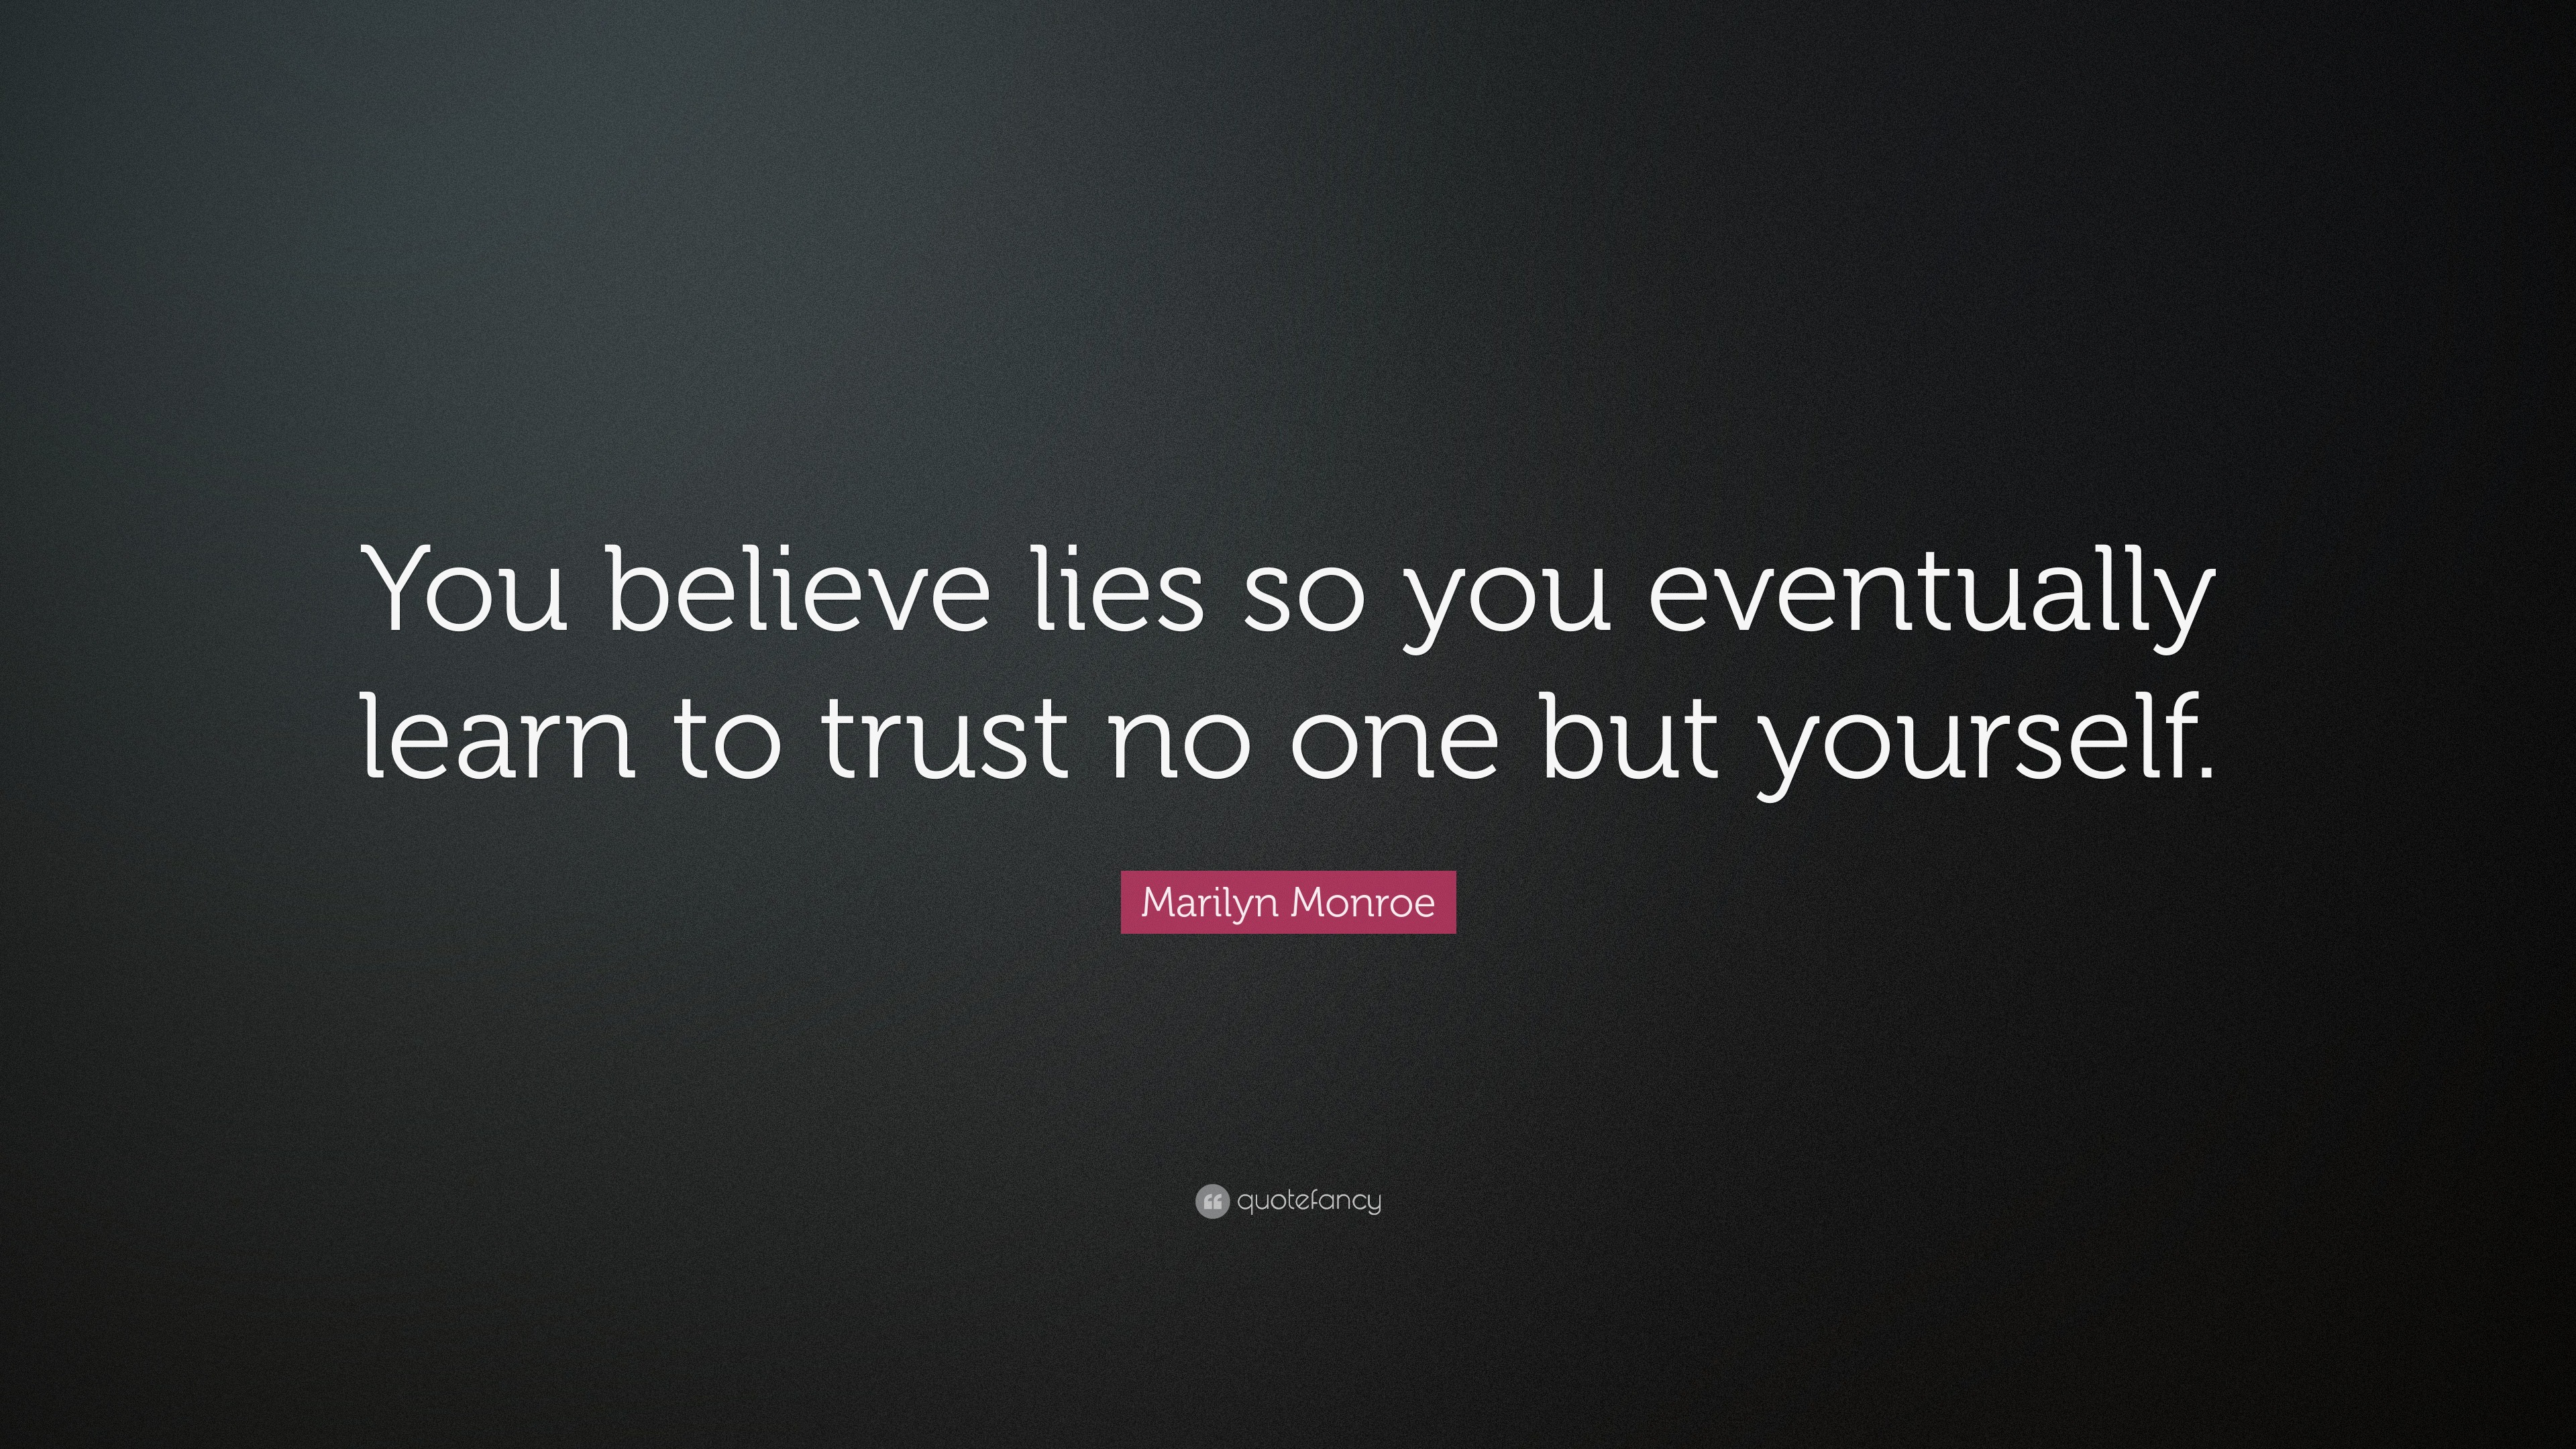 Marilyn Monroe Quote: “You believe lies so you eventually learn to ...